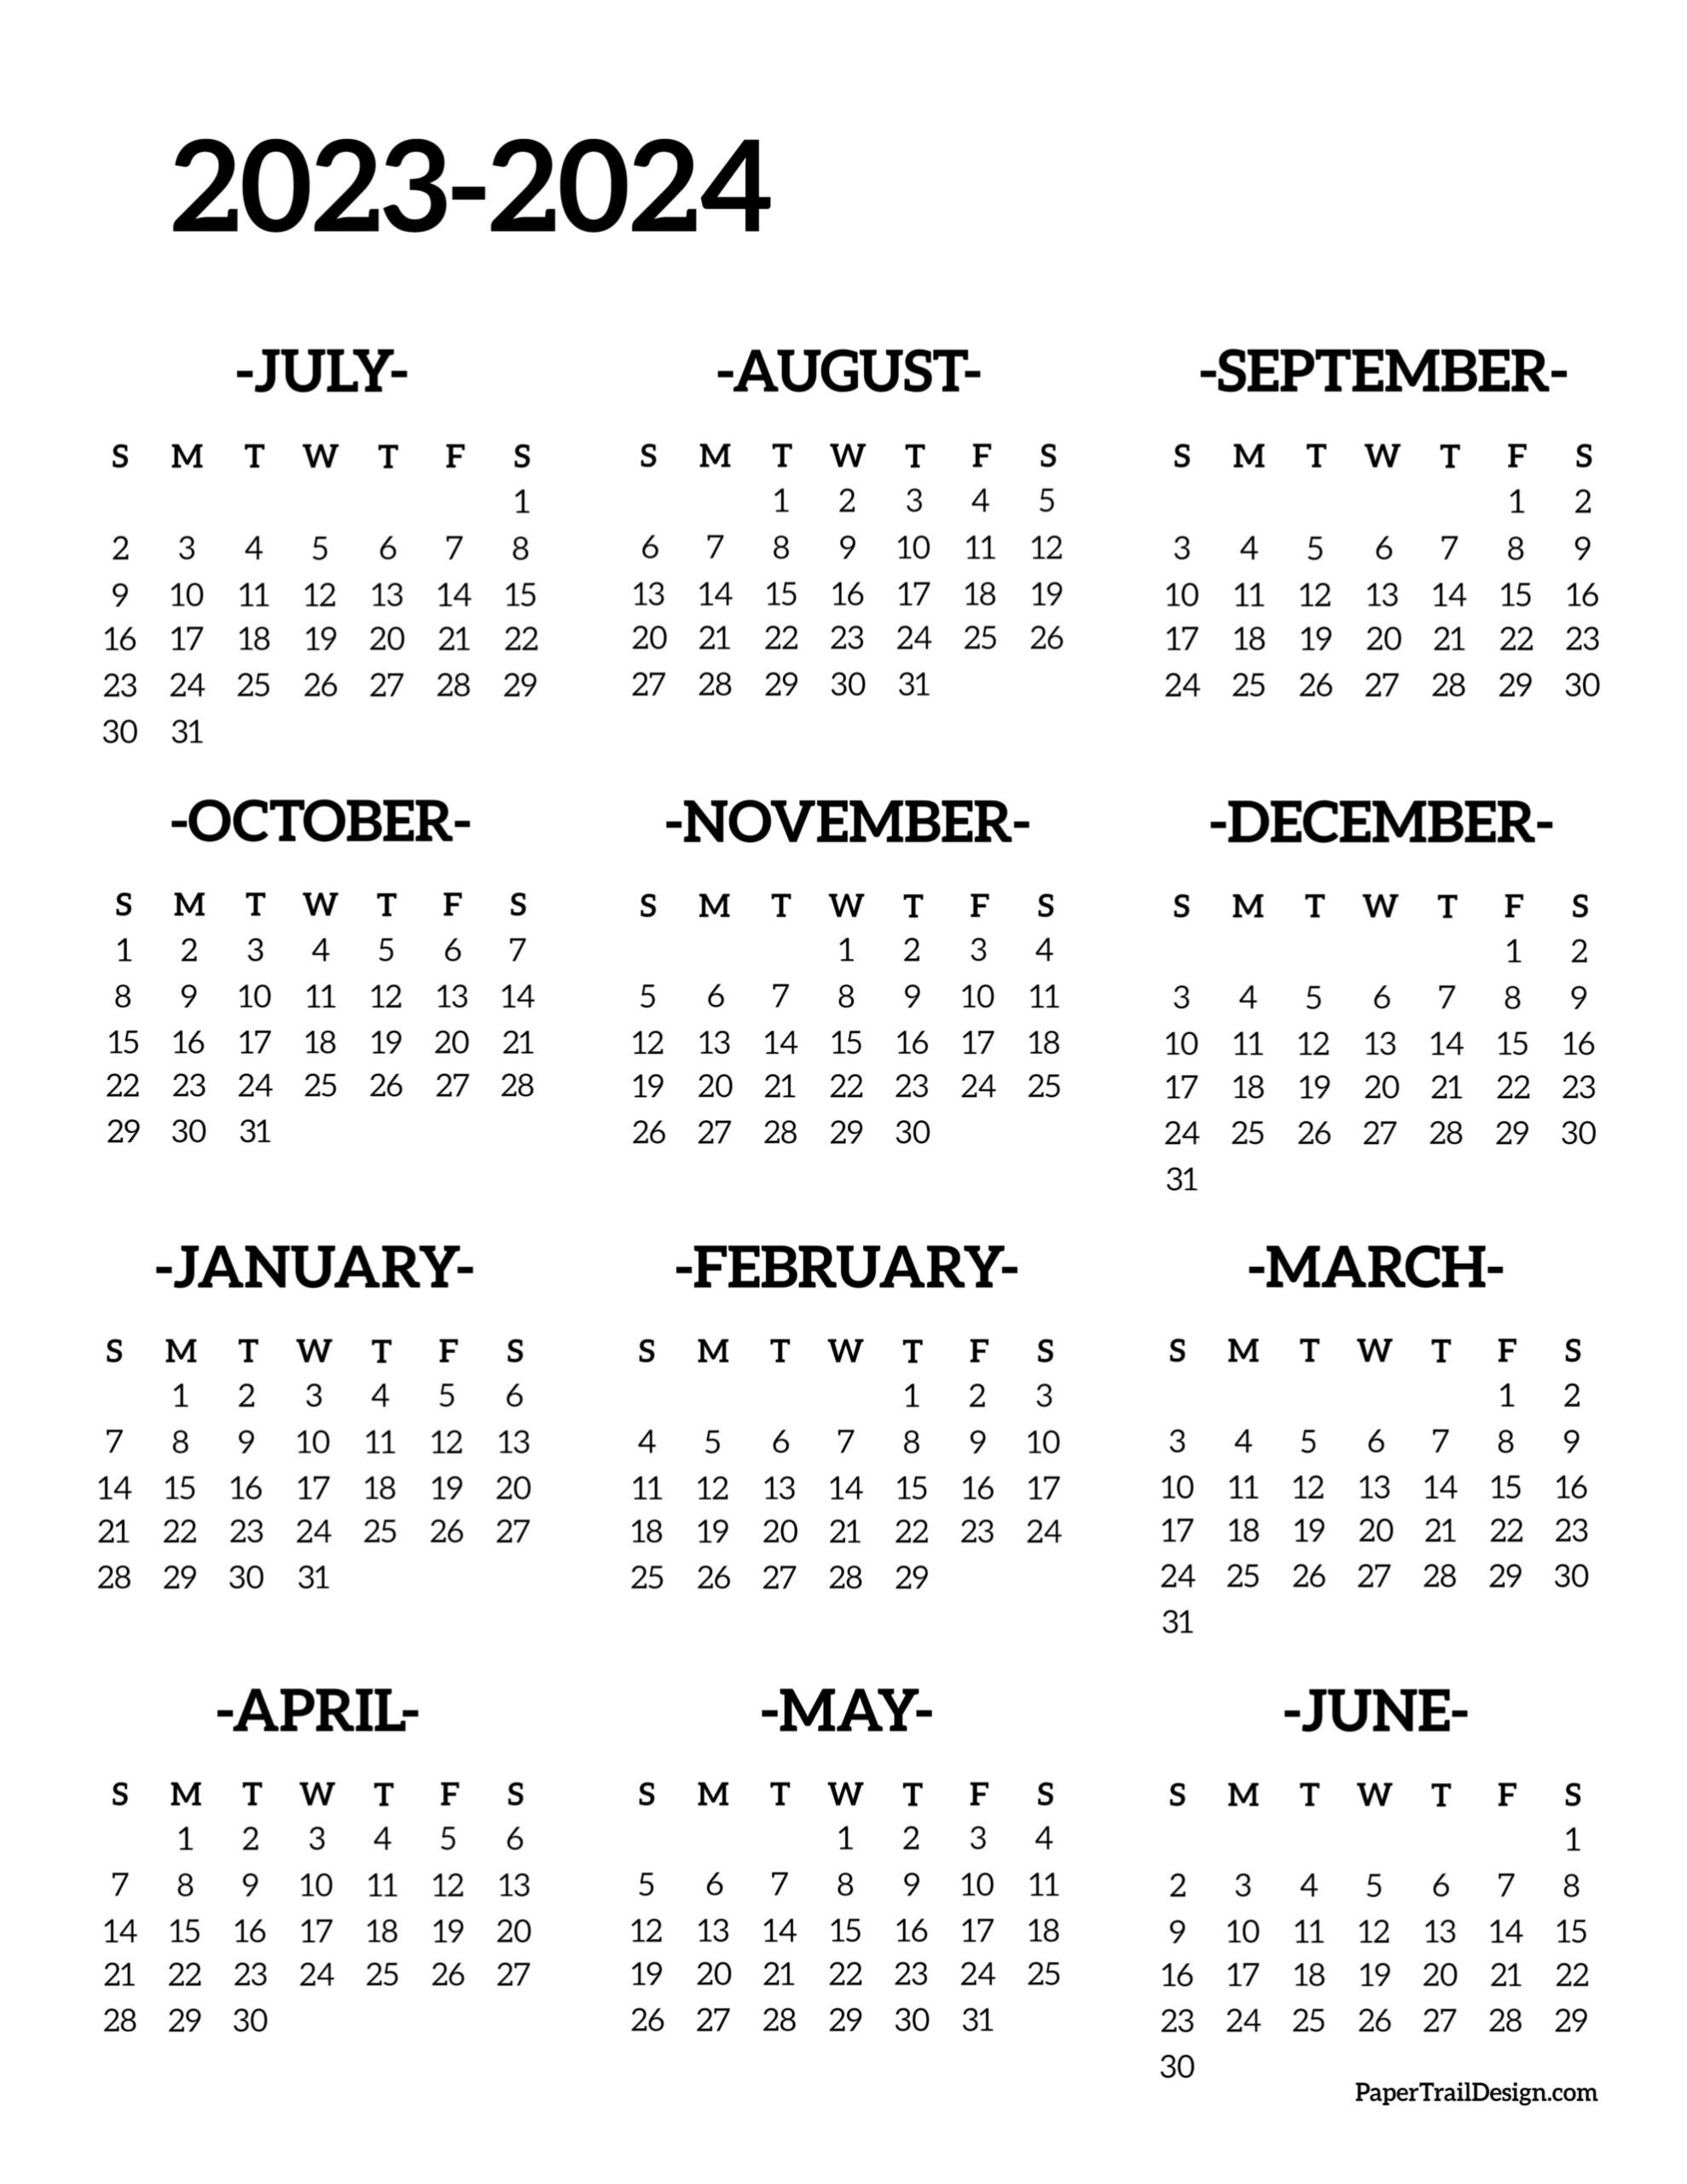 2023-2024 School Year Calendar Free Printable - Paper Trail Design for Yearly Calendar 2023 And 2024 Printable